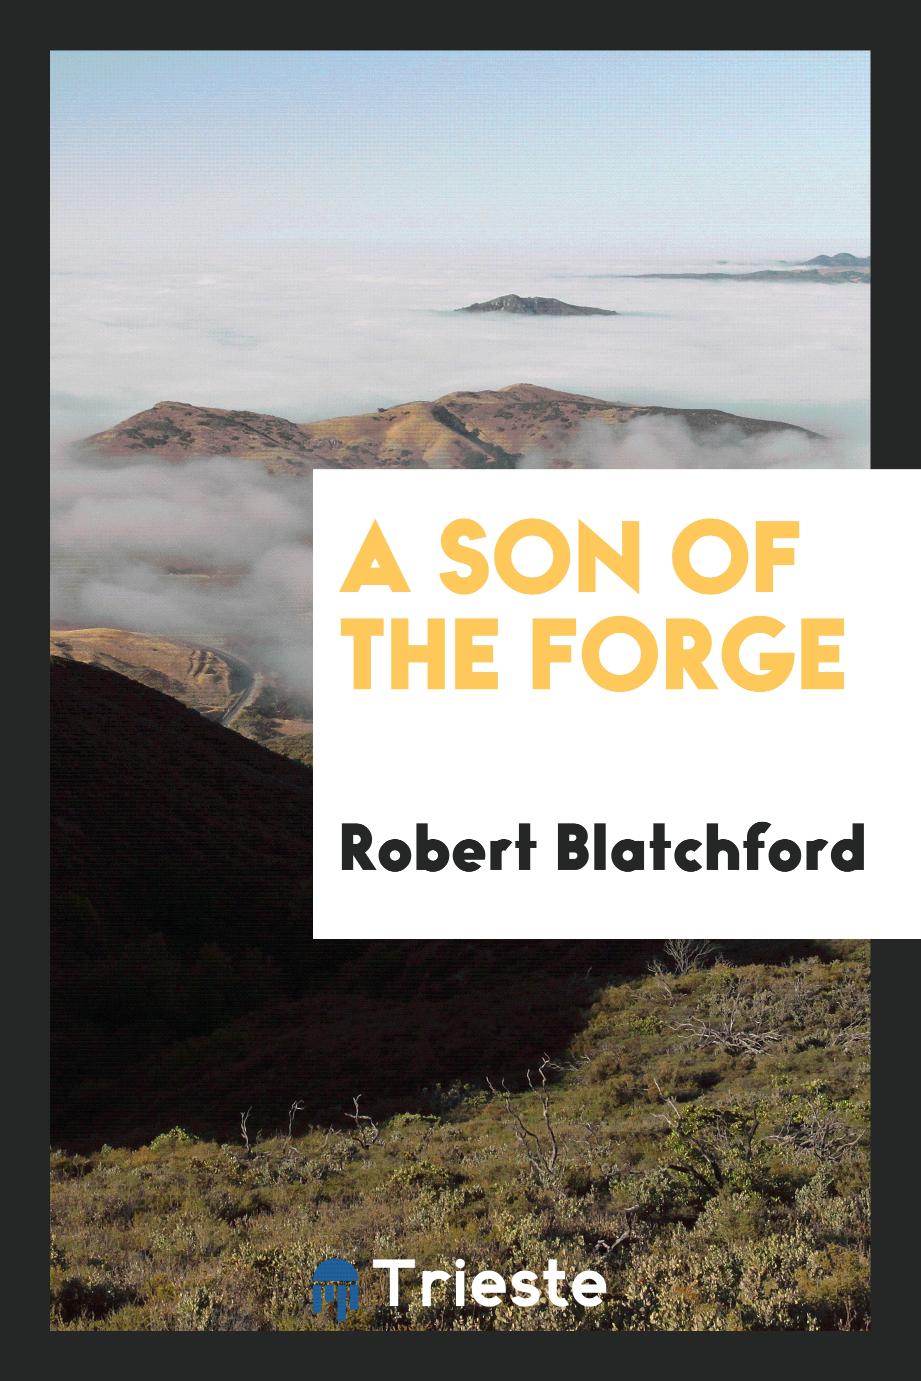 A Son of the Forge